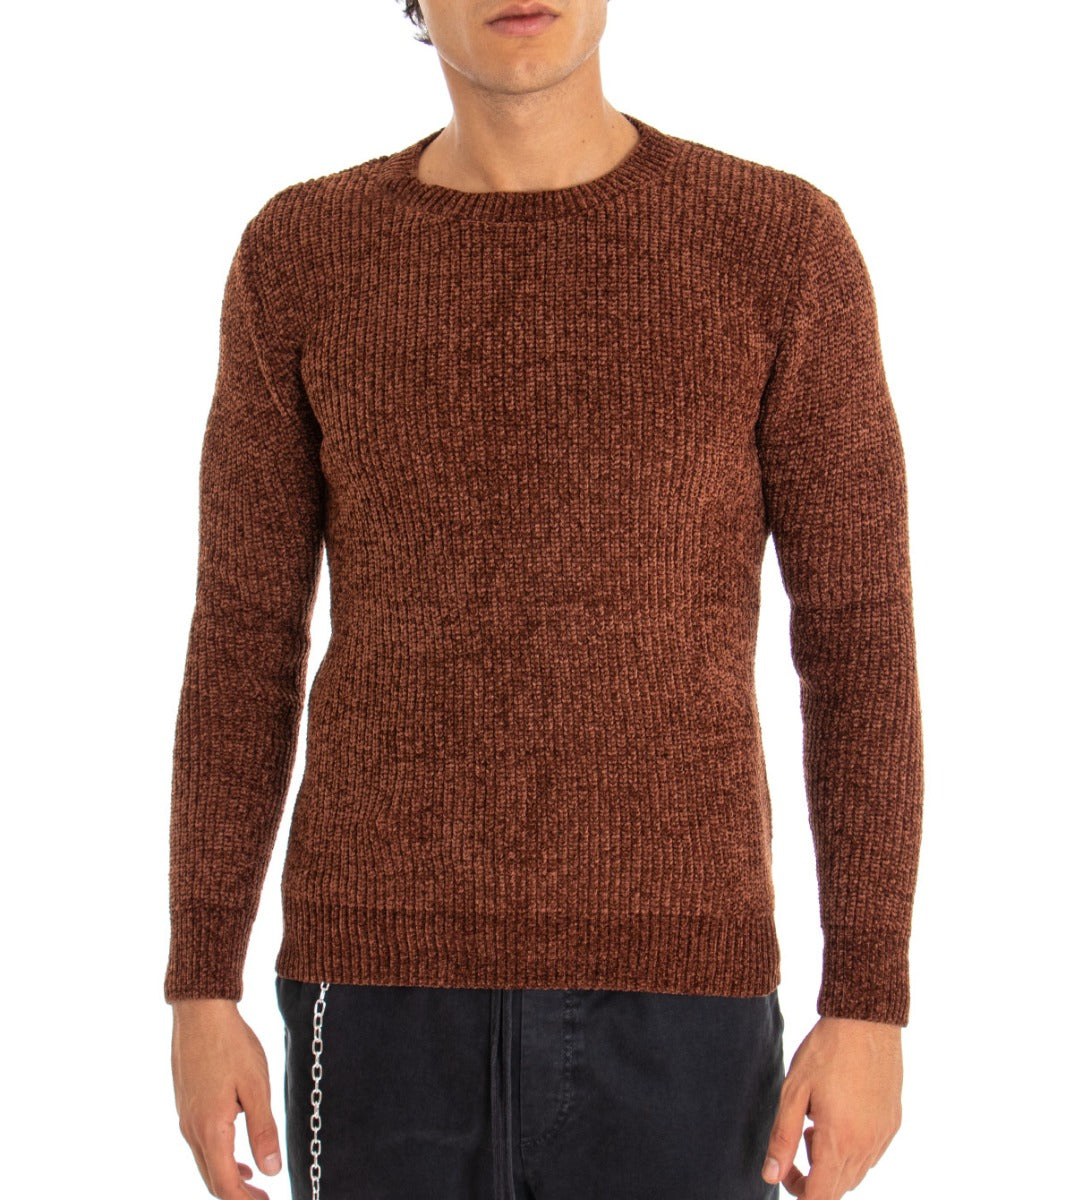 Men's Solid Color Sweater Tobacco Round Neck Long Sleeves Casual GIOSAL